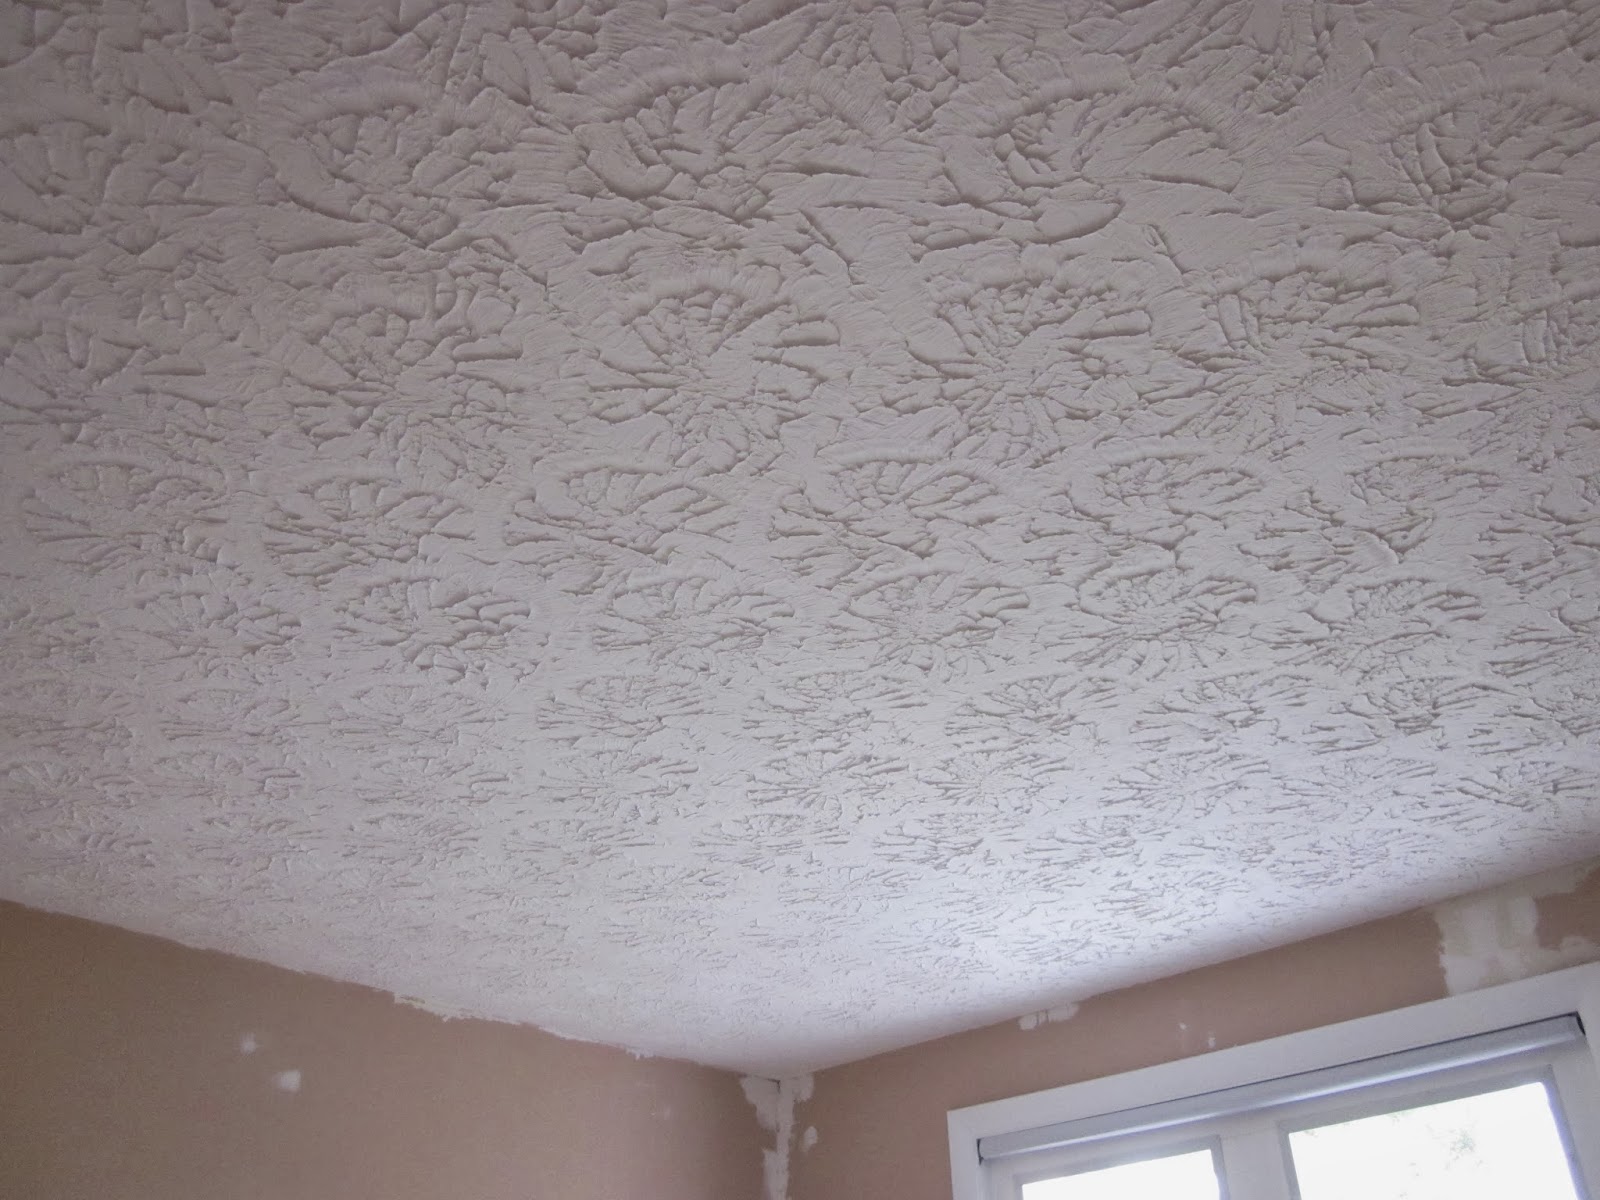 BonnieProjects: Removing textured ceilings